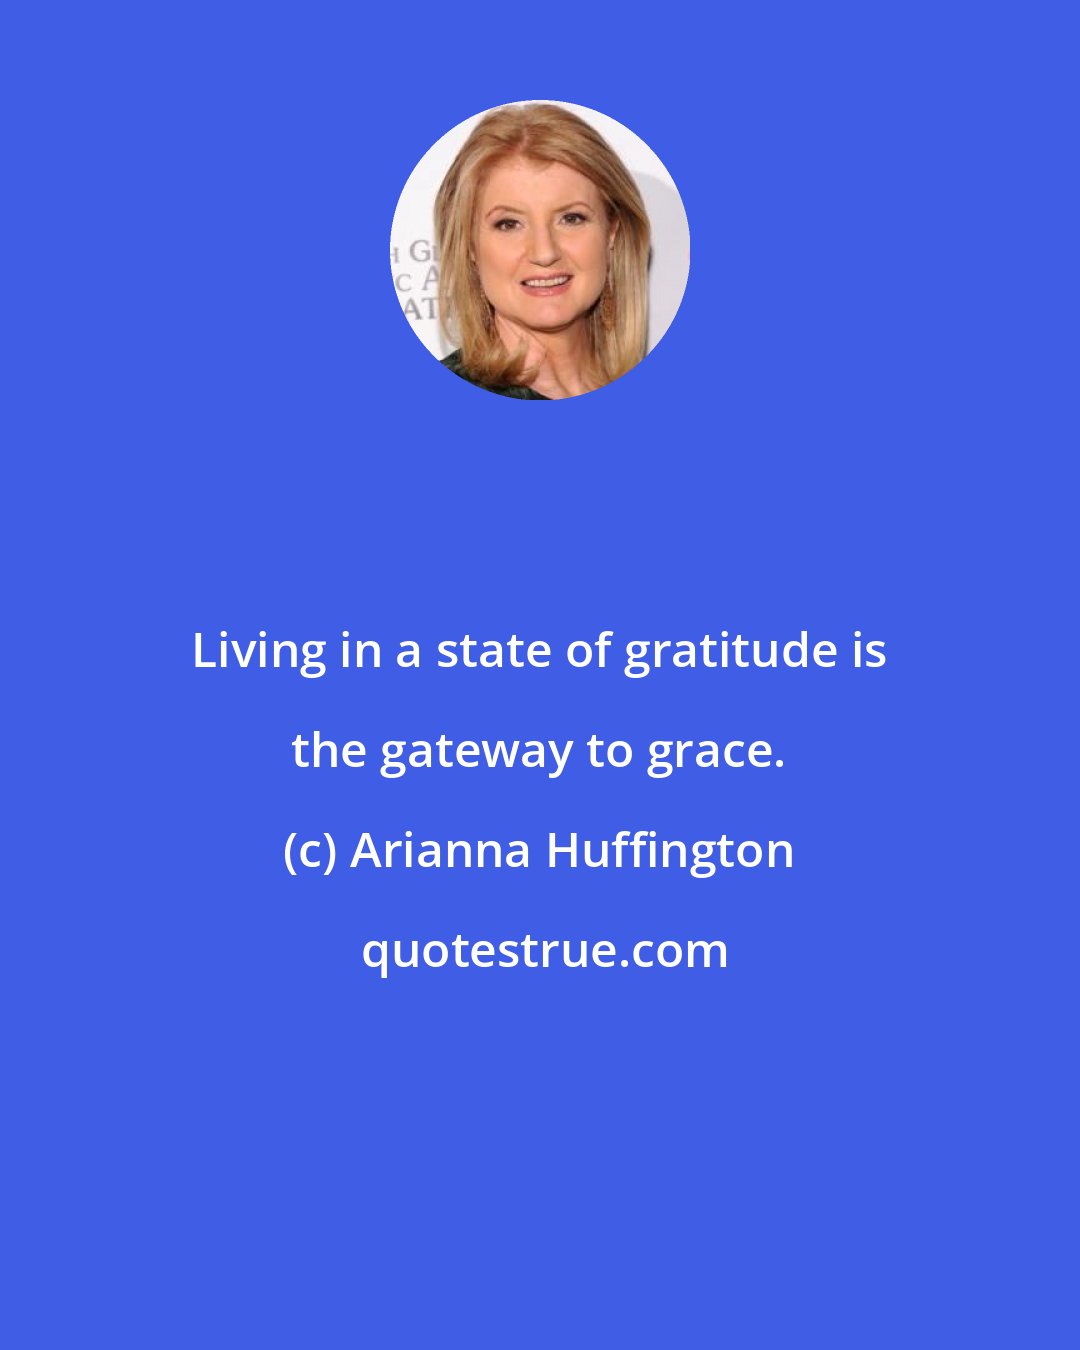 Arianna Huffington: Living in a state of gratitude is the gateway to grace.